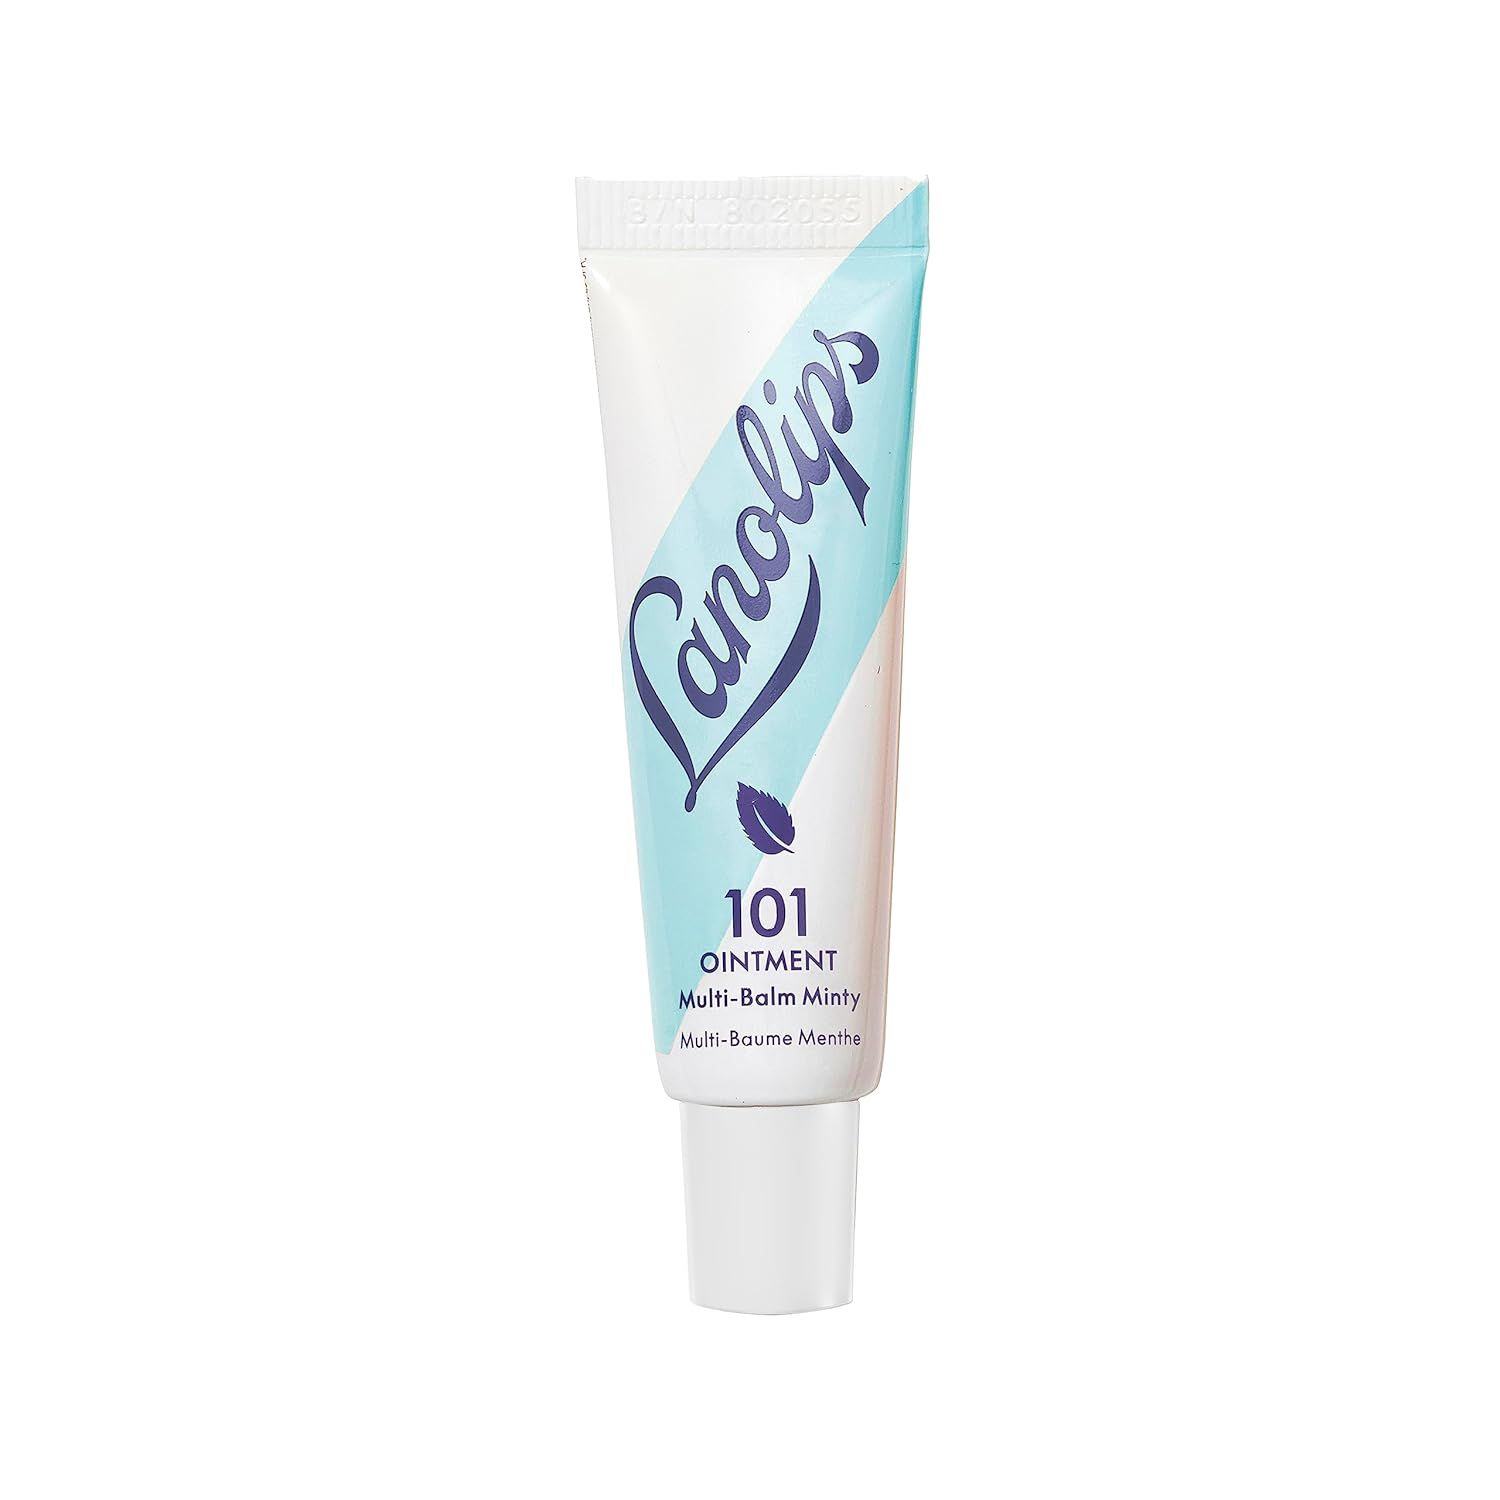 Lanolips 101 Ointment Multi-Balm, Minty - Fruity Lip Balm with Vitamin E Oil and Lanolin for Lip ... | Amazon (US)